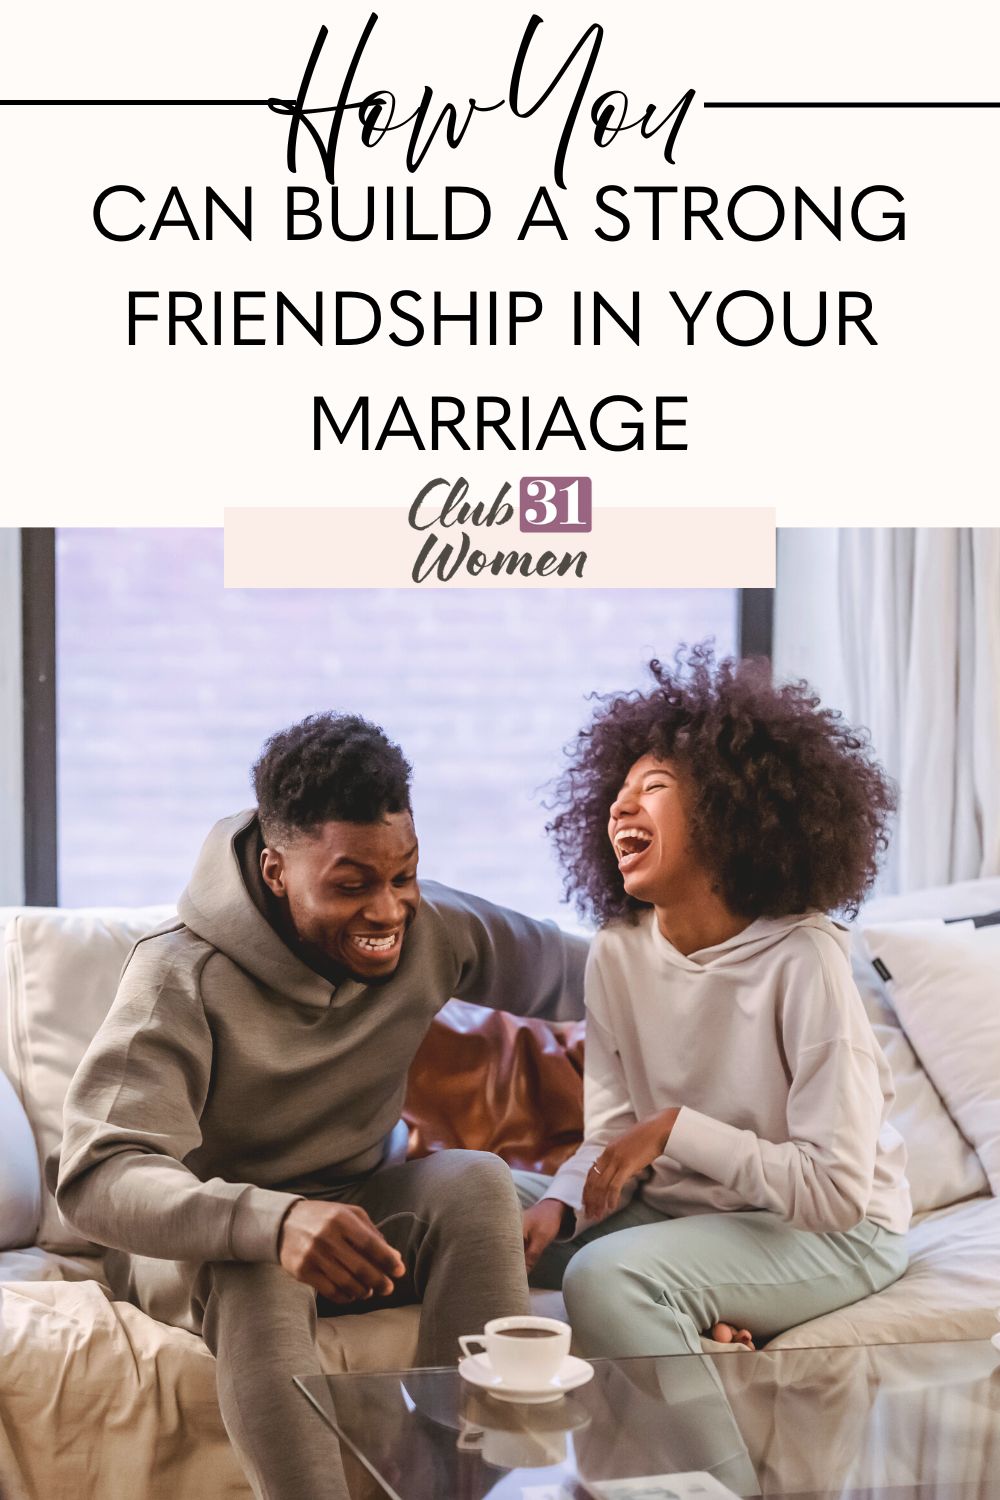 Have you considered the possibility of having a strong friendship in your marriage? It starts with the little things you choose each day. via @Club31Women